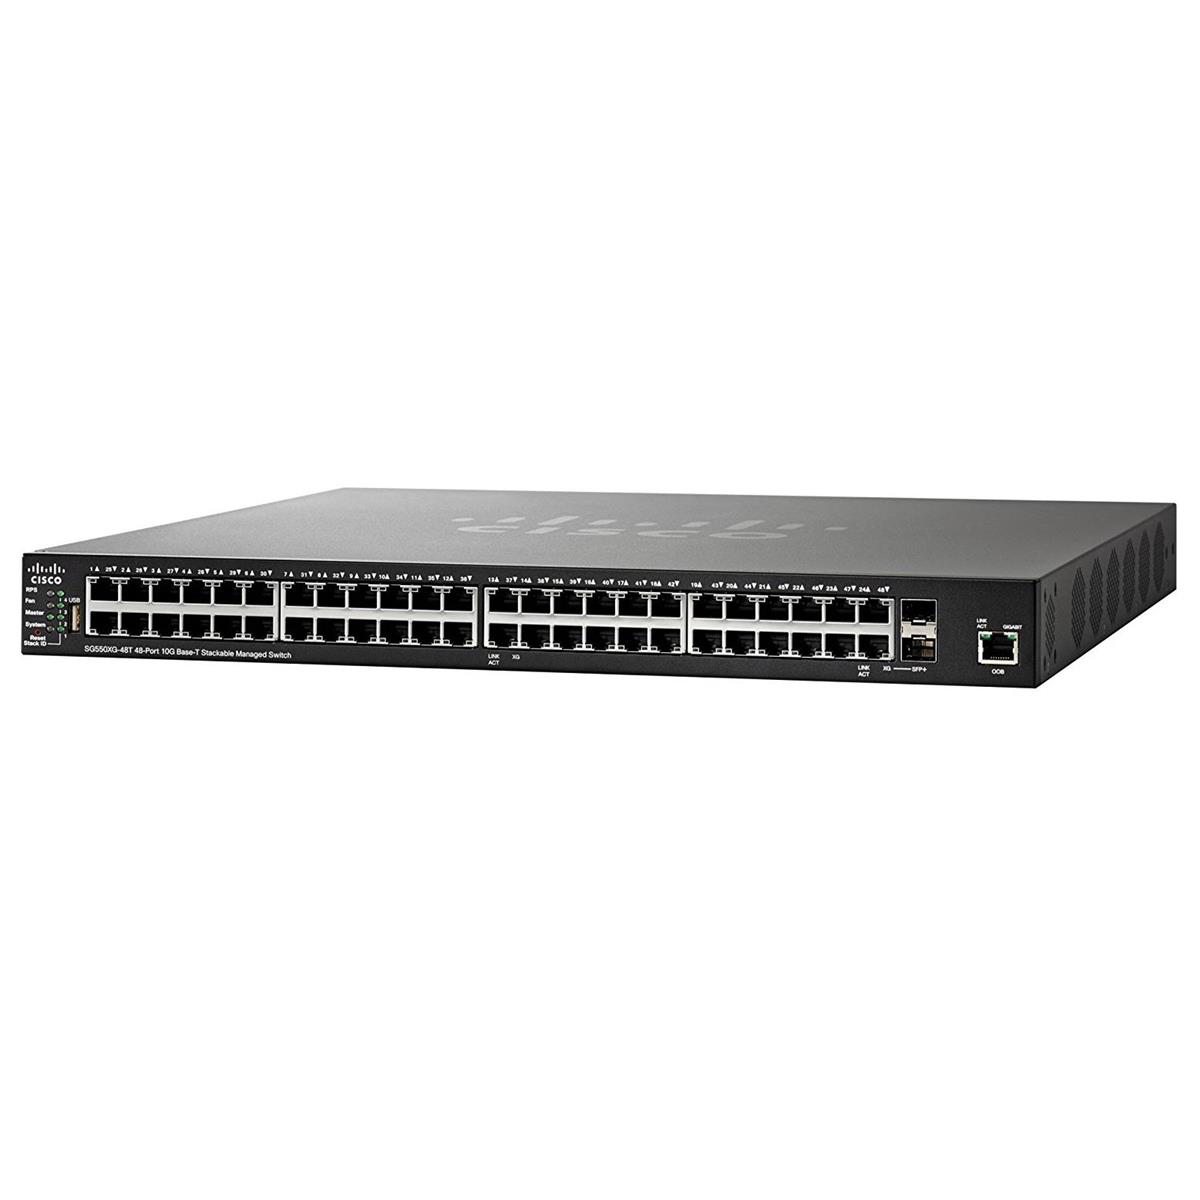 

Cisco SG550XG-48T 48 Port 10GBase-T Stackable Managed Switch